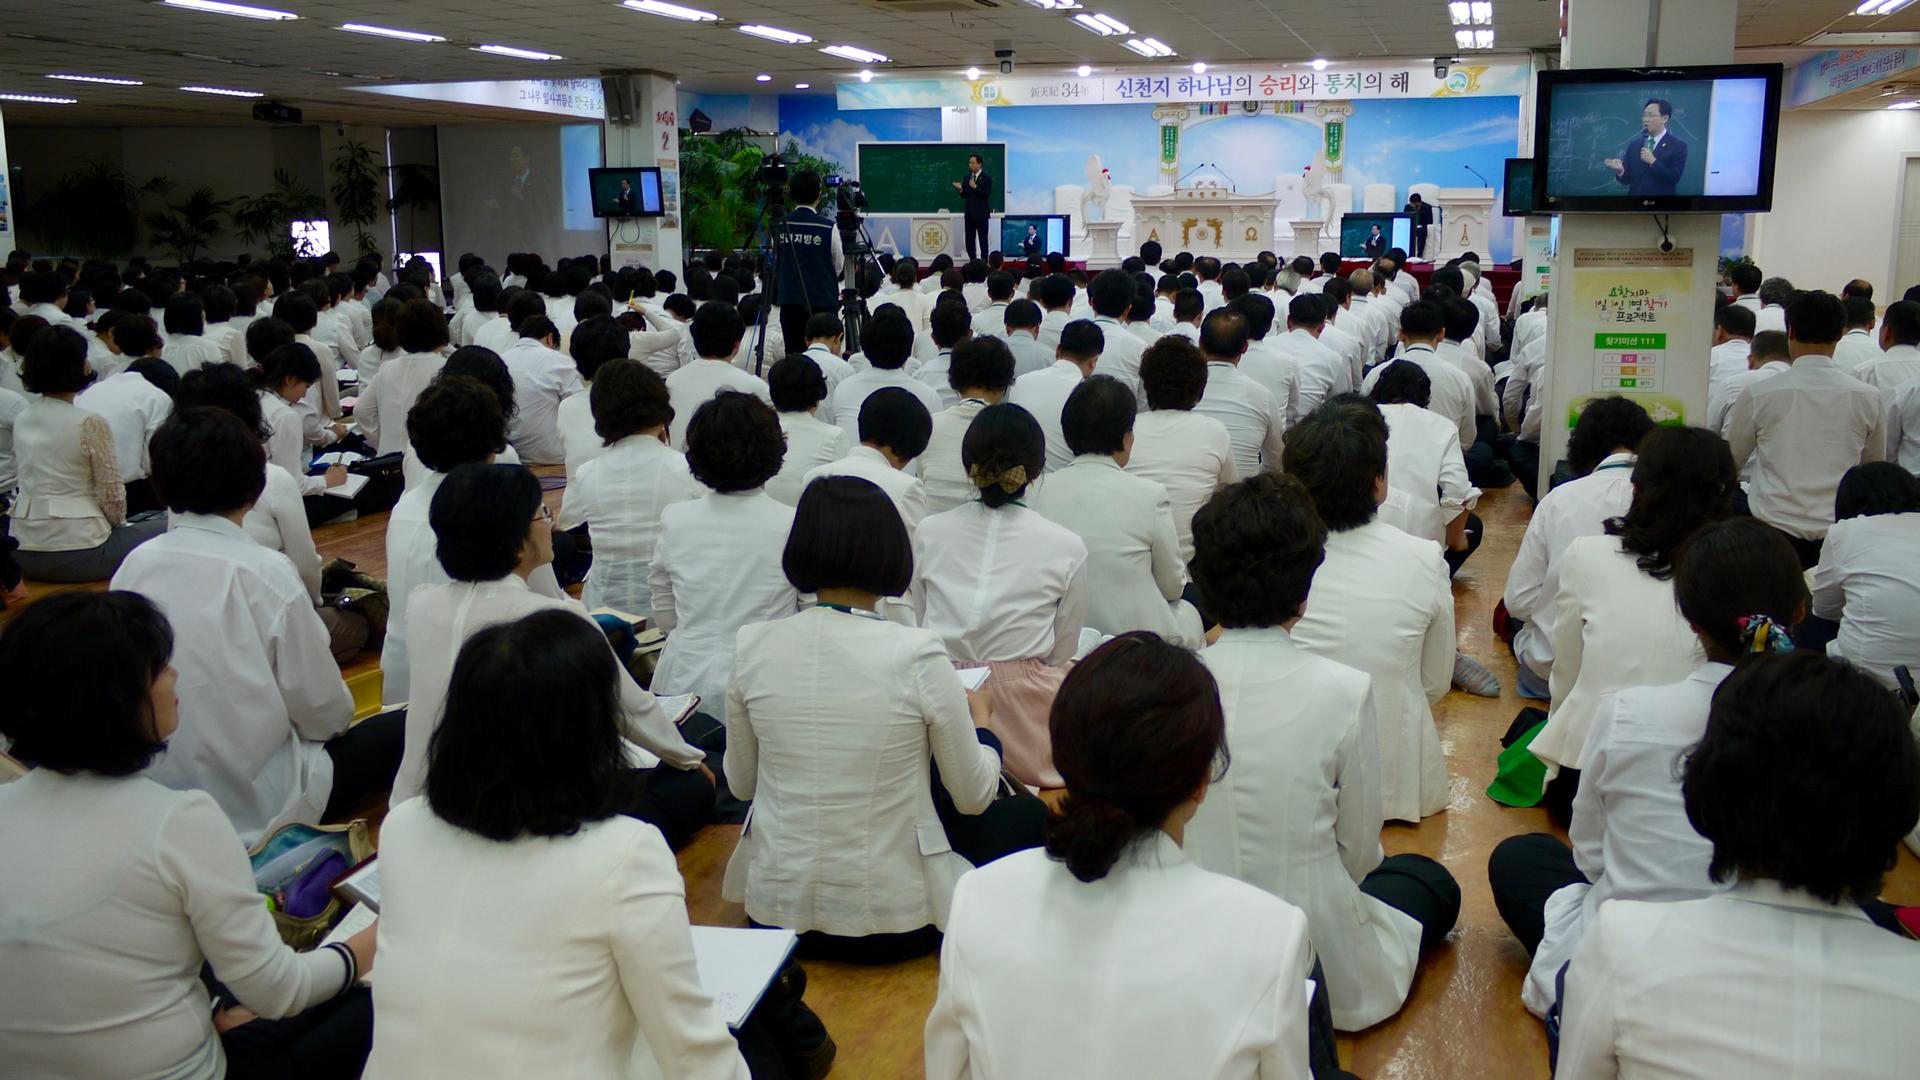 Members of Shinchonji must complete at least six months of rigorous Bible study classes before they are allowed to attend one of the group's big worship services. This location is the main center for services in Seoul, and its location is not publicized.